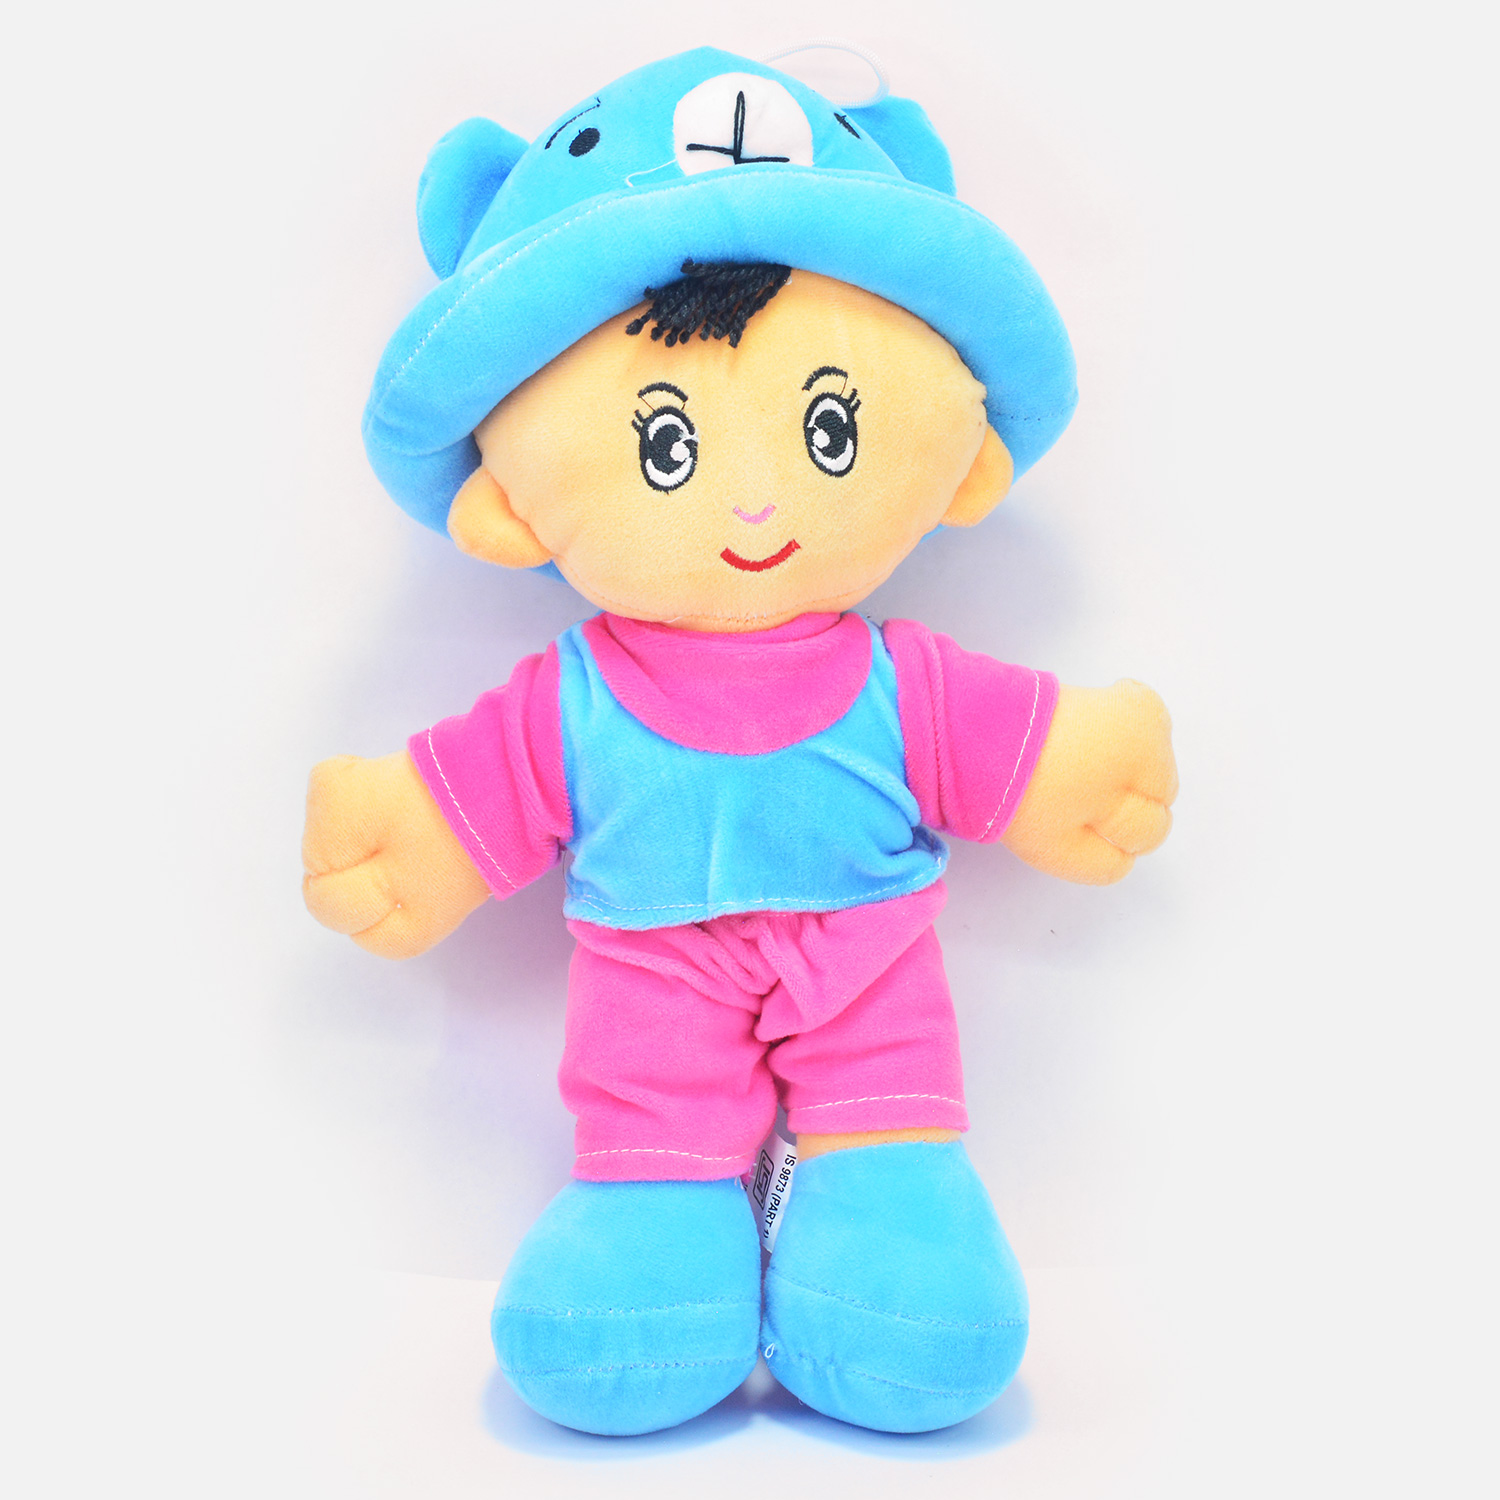 Small Smiling Kid Soft Toy